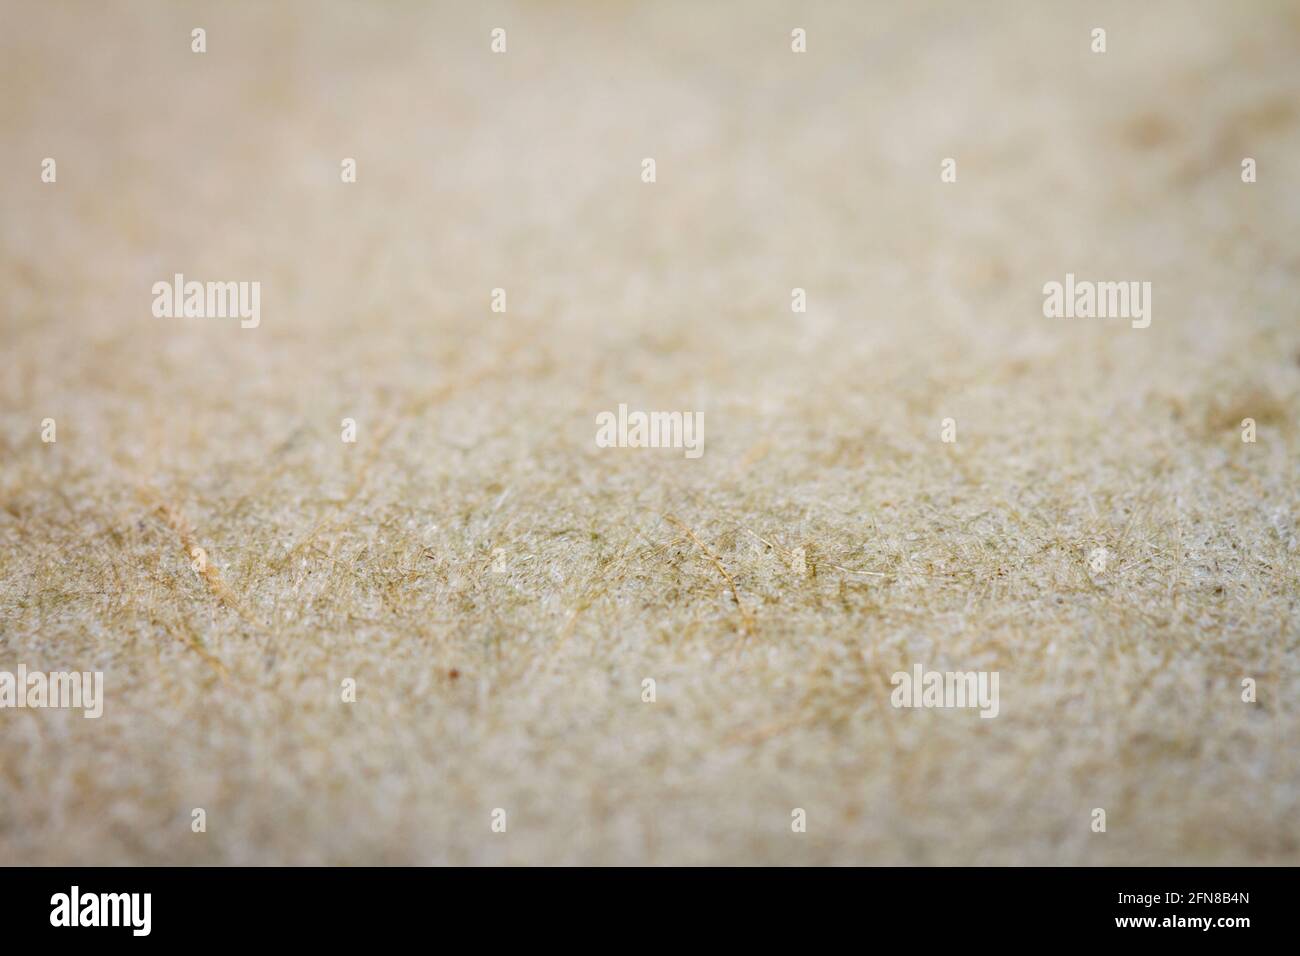 Extreme closeup of handmade paper with shallow deph of field. Stock Photo